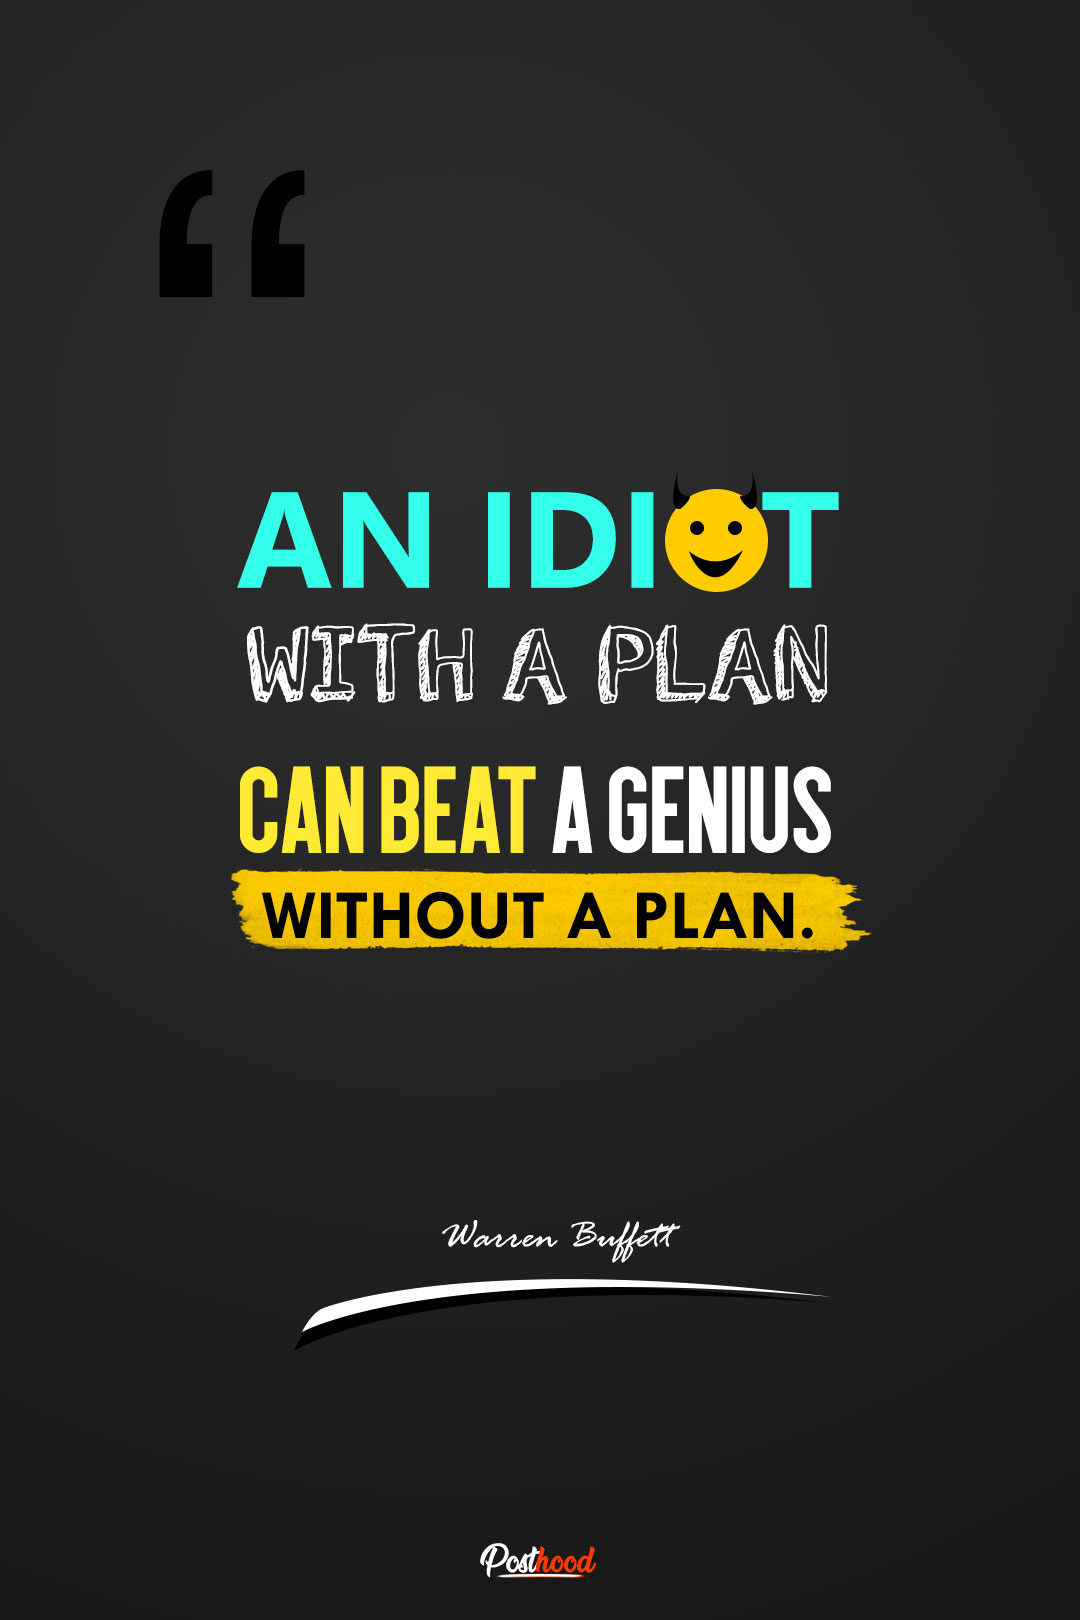 Motivational quotes to boost your plans and ideas into action. 